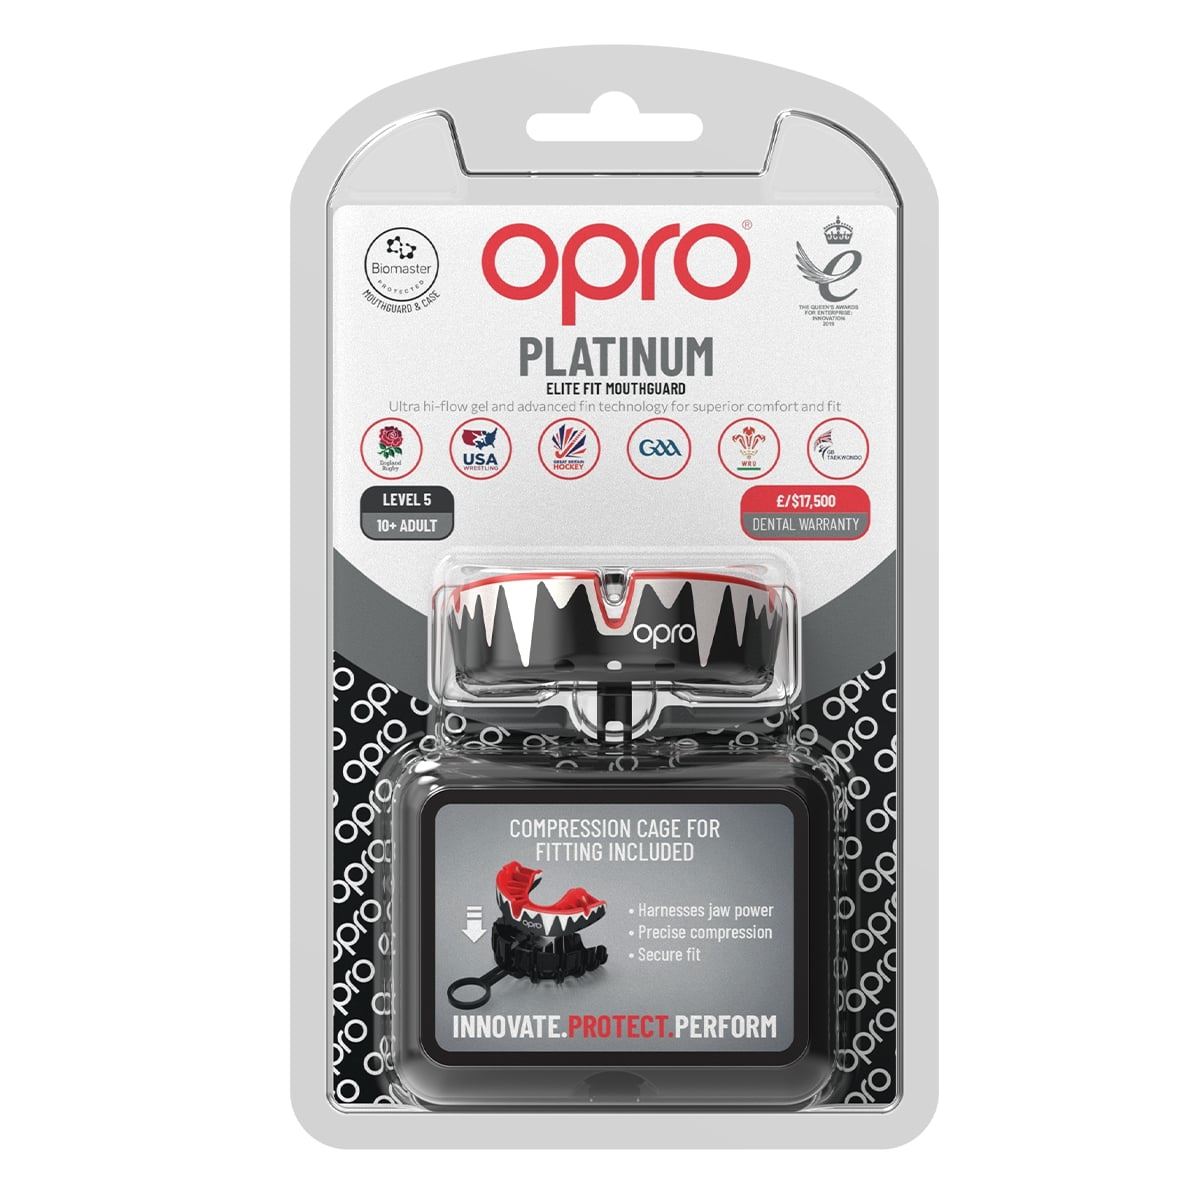 Men's Rugby Protective Mouthguard OPRO Self-Fit Platinum Fangz 2022 Black/White/Red Alternate 1